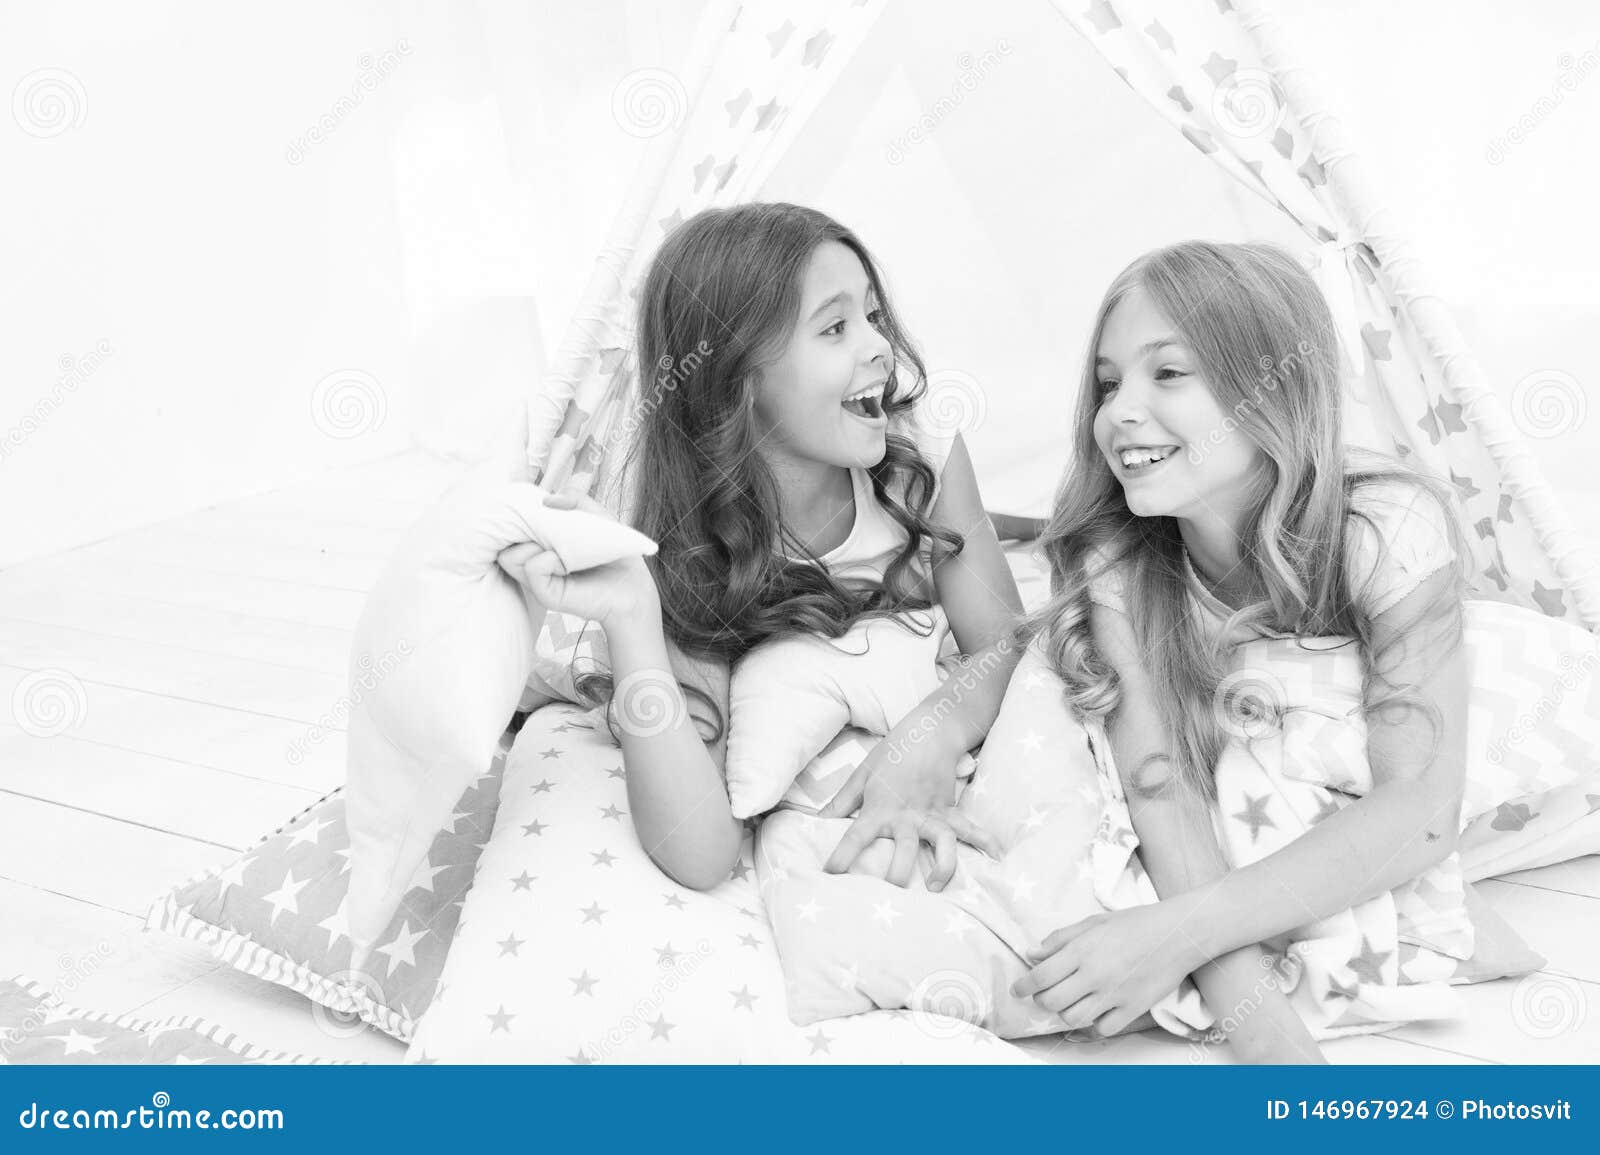 anna lyon share sharing a bed with sisters friend photos